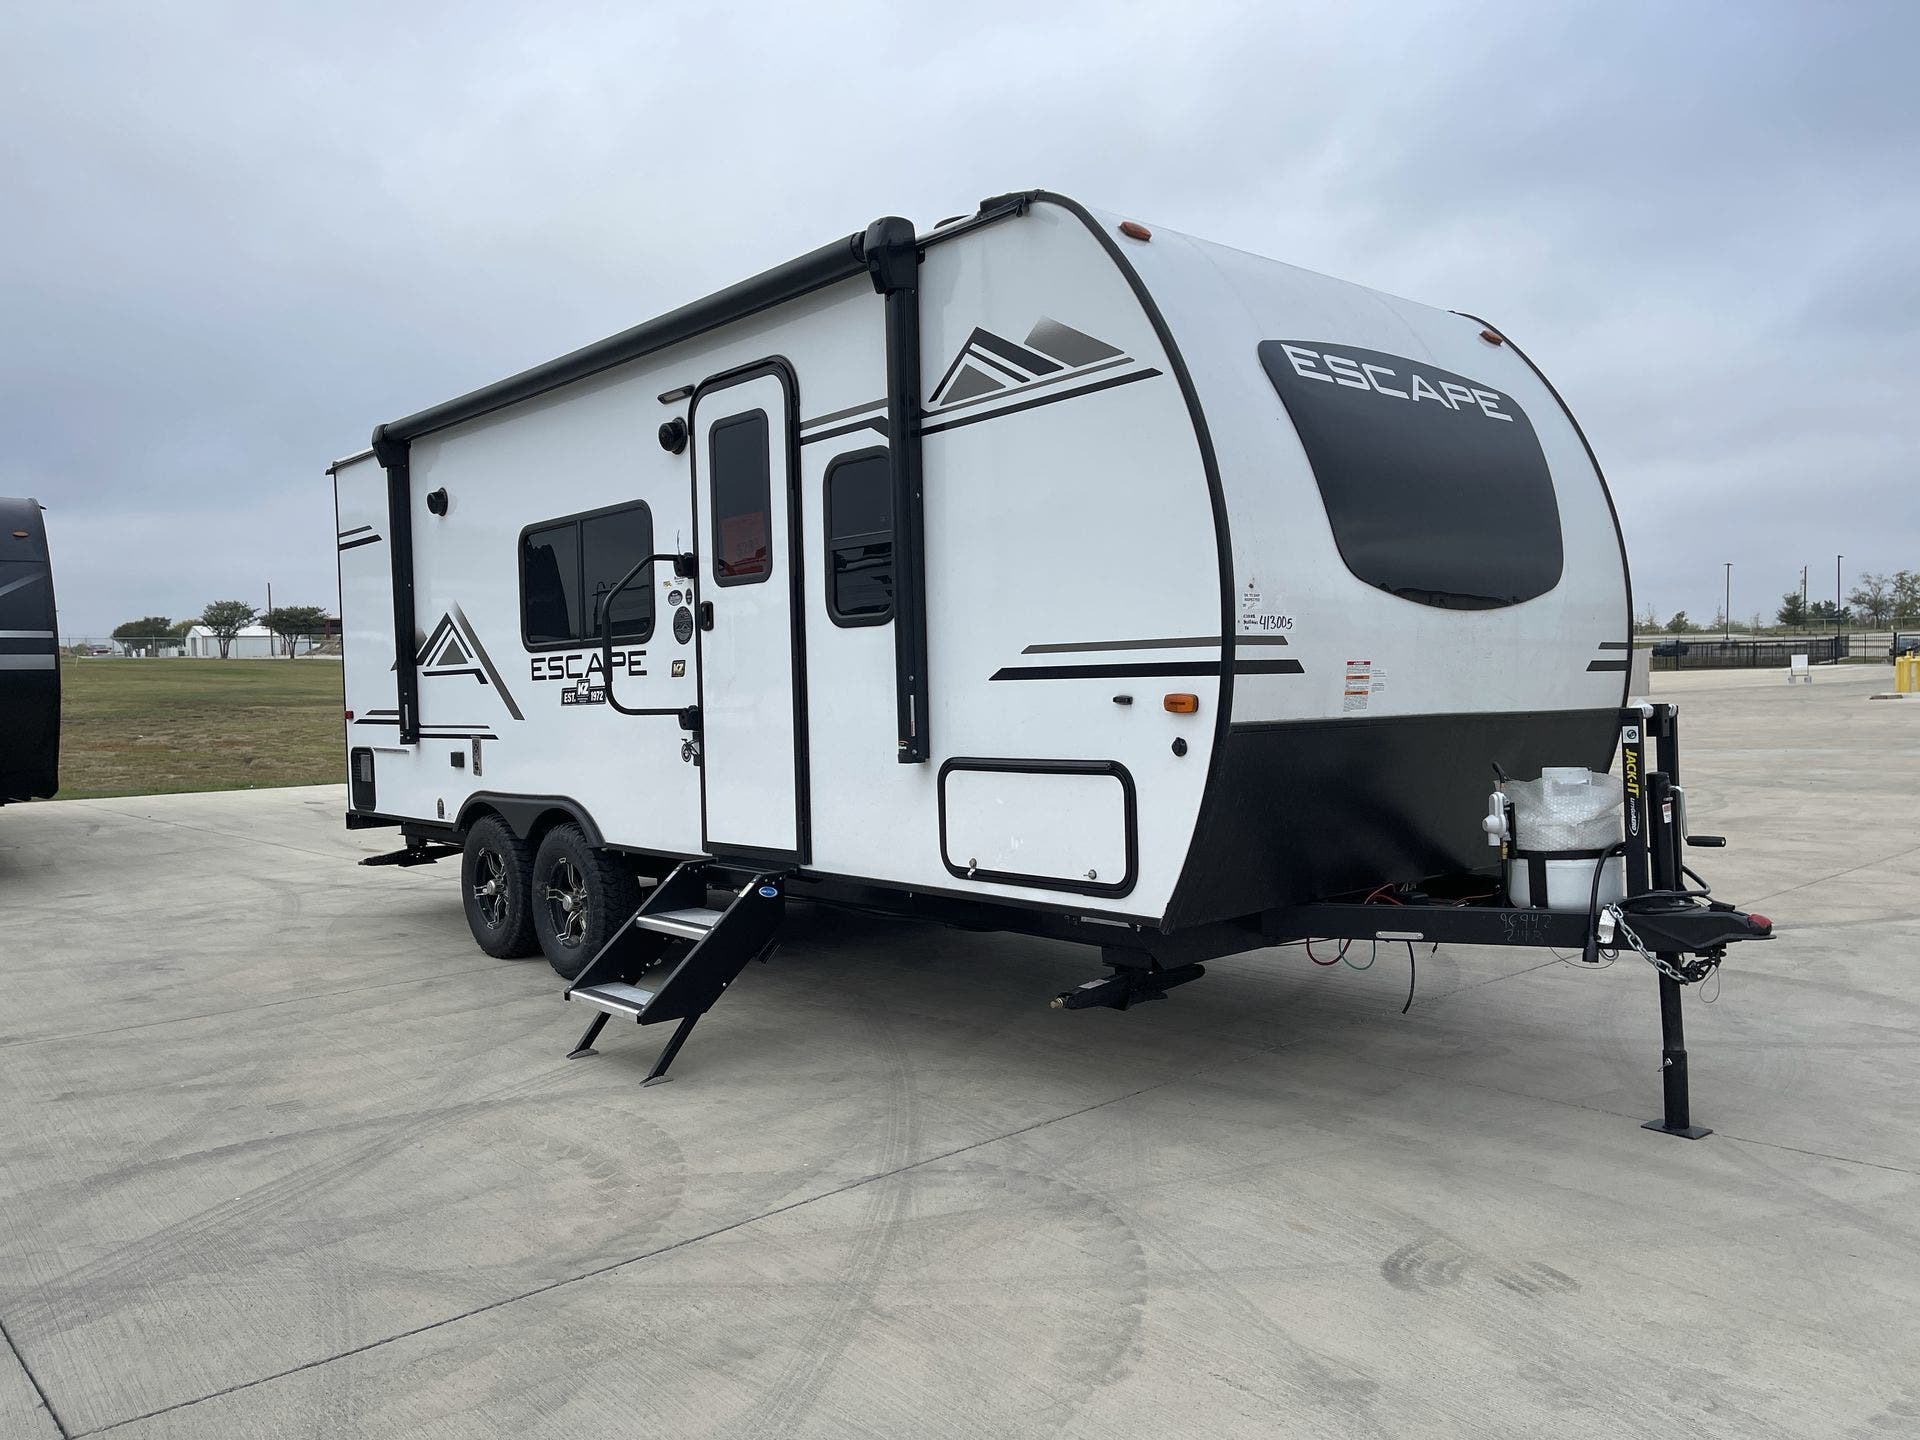 21 K Z Escape 21RB RV for Sale in Fort Worth, TX 21   21 ...